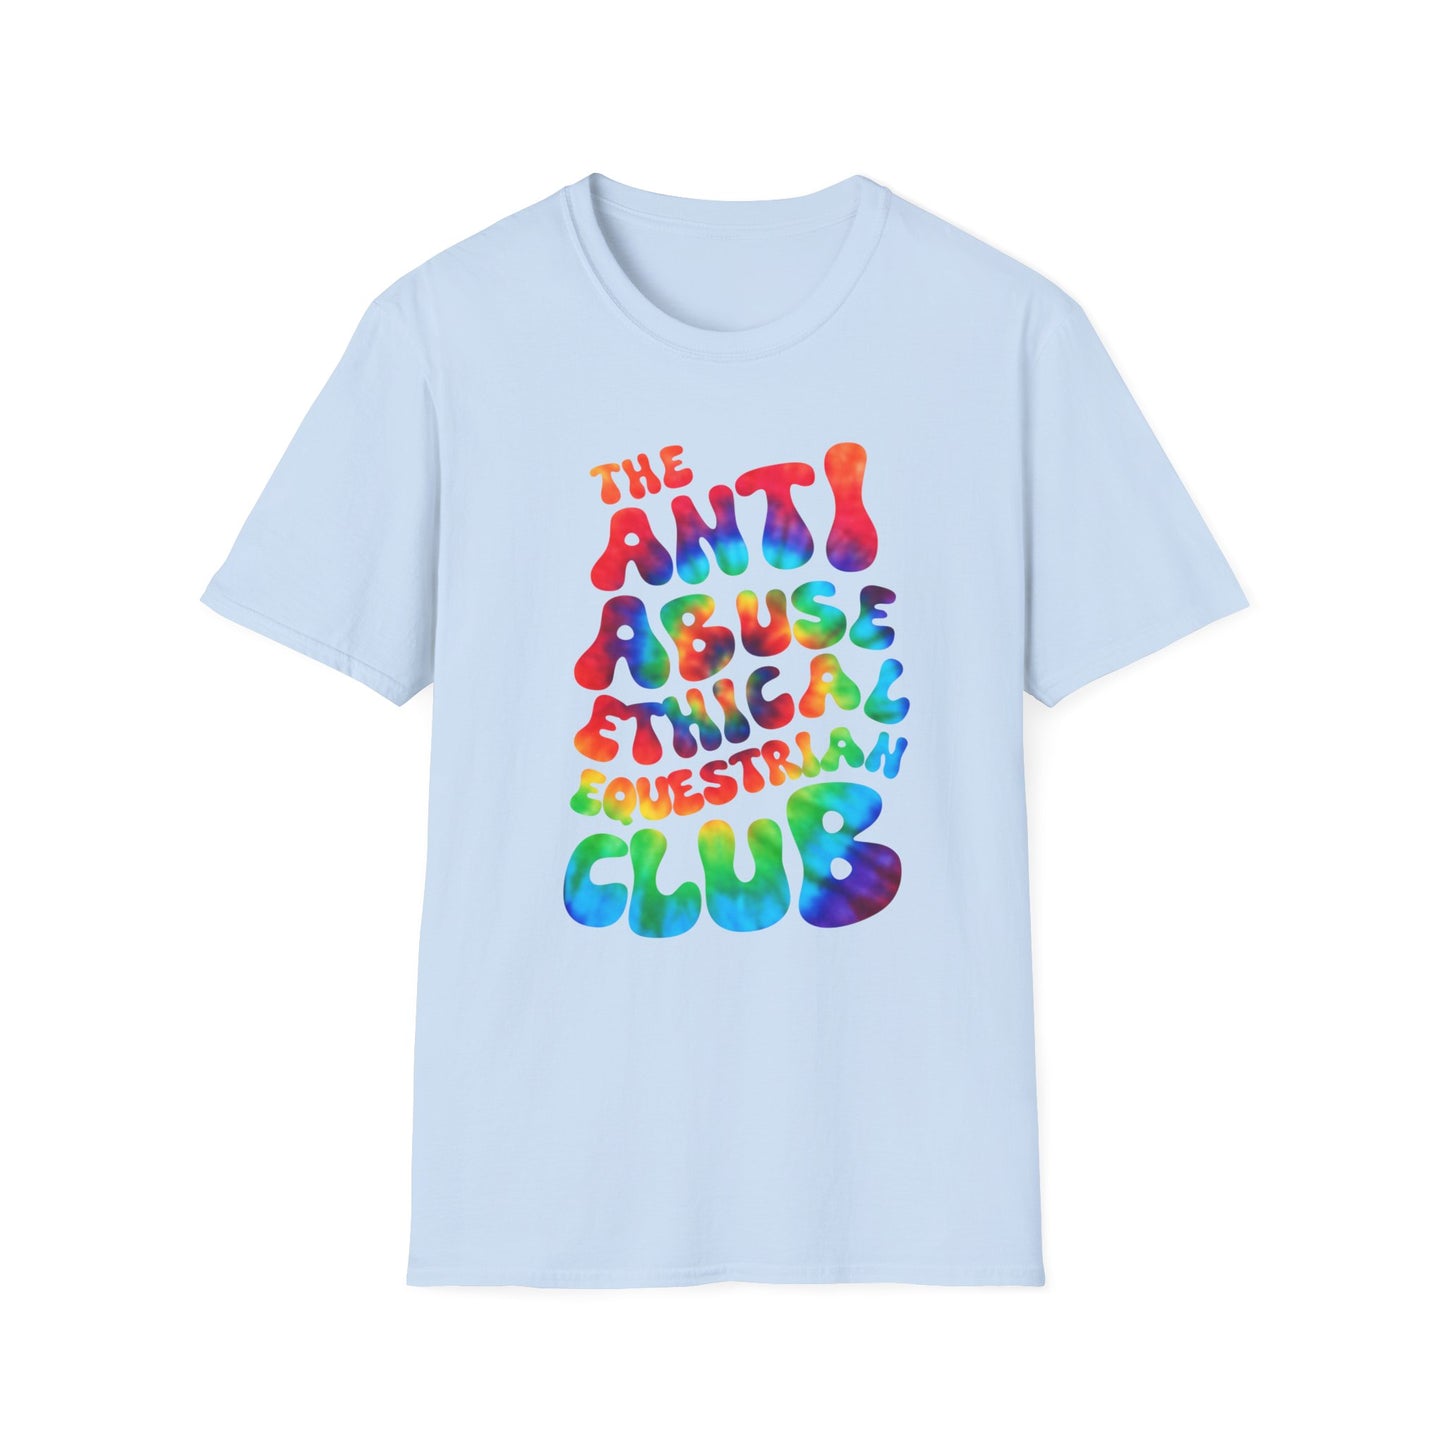 Tie-Dye Ethical Equestrian Softstyle T-Shirt